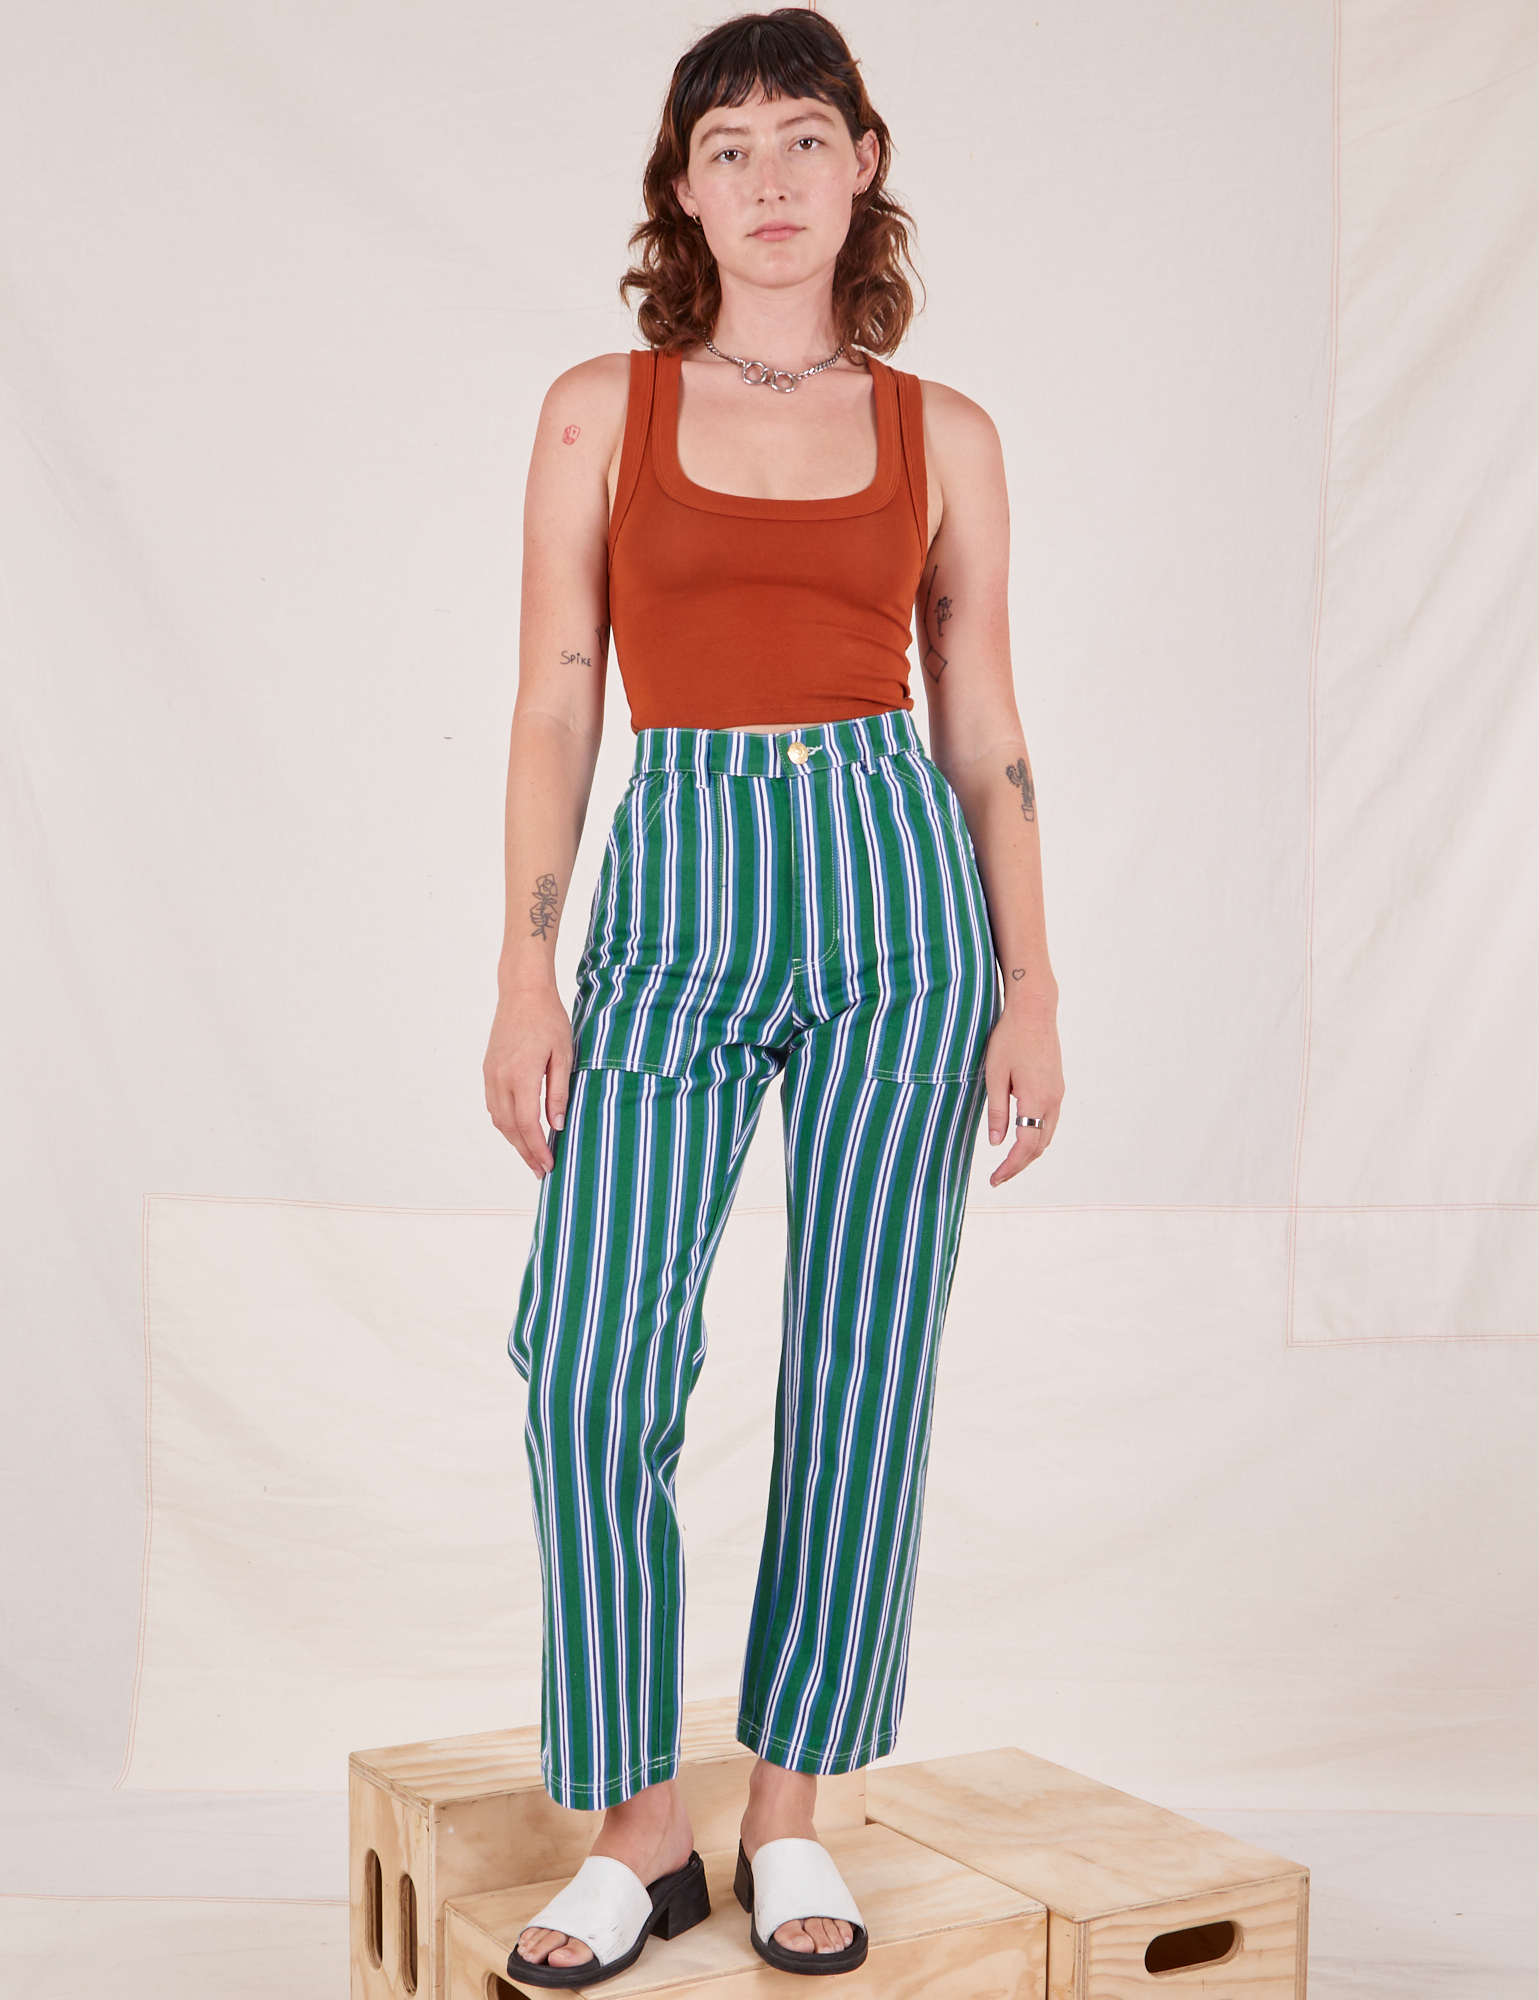 Alex is 5&#39;8&quot; and wearing XS Stripe Work Pants in Green paired with burnt terracotta Cropped Tank Top